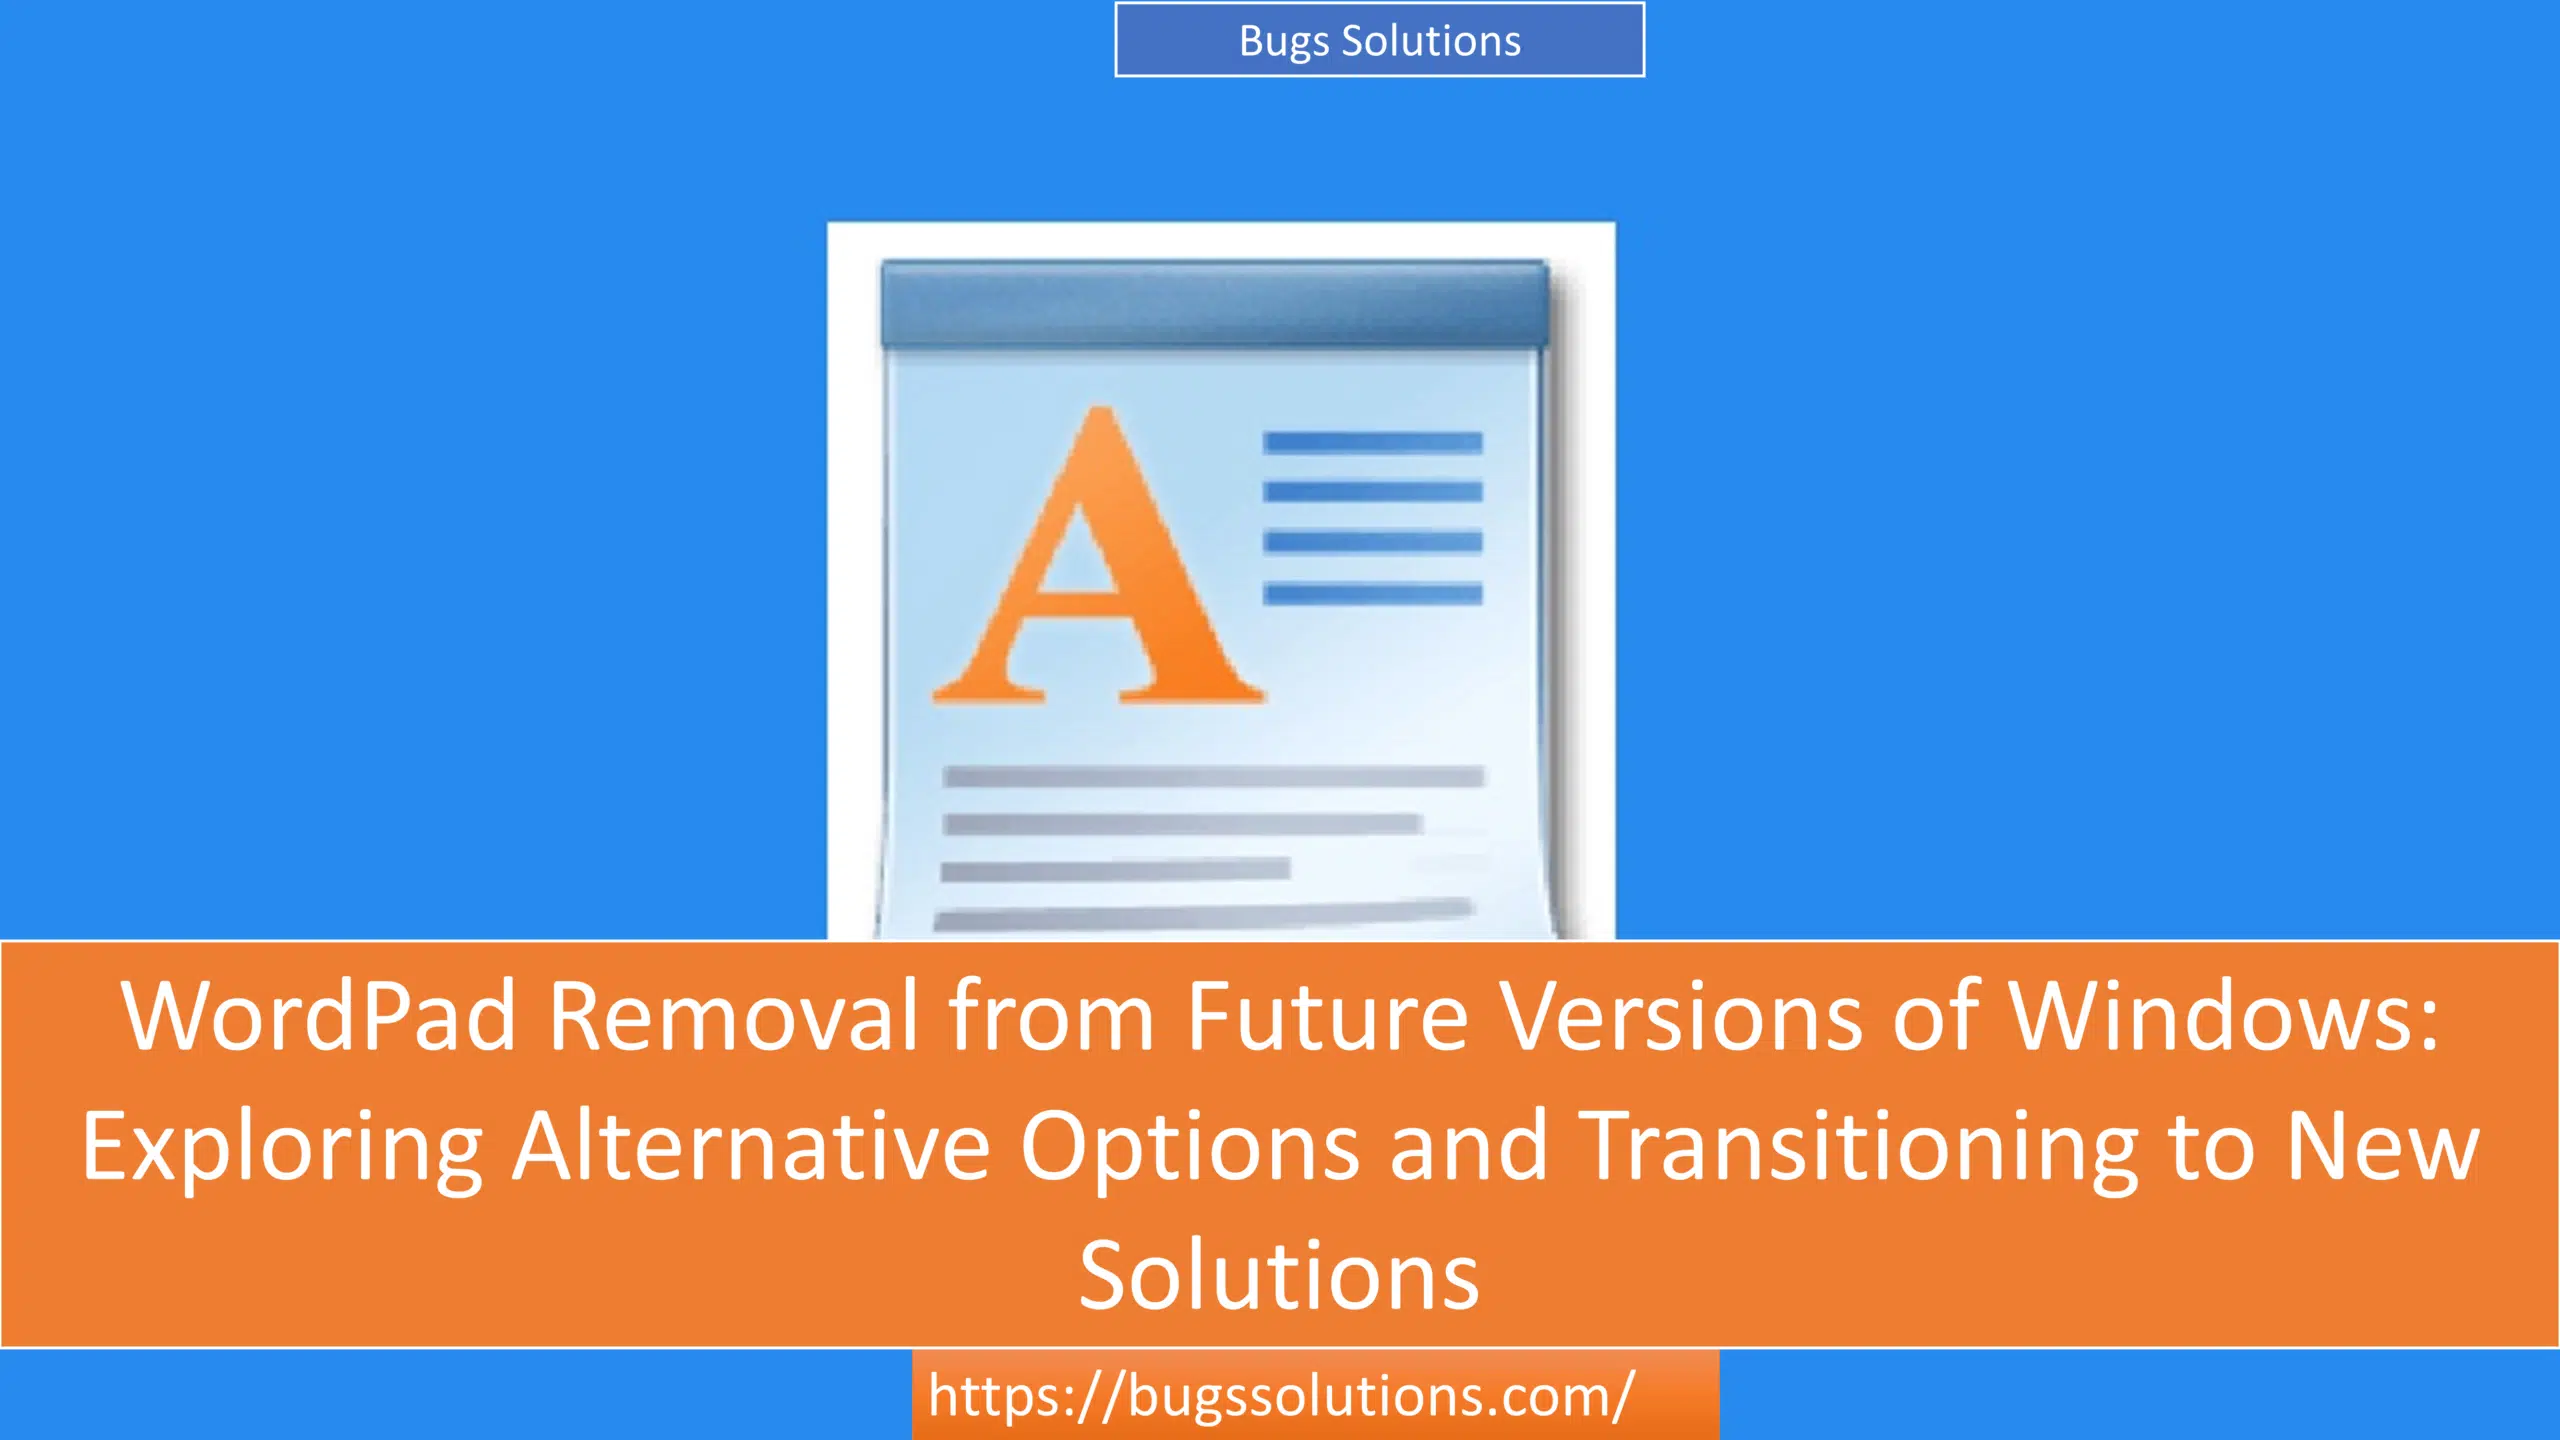 WordPad Removal from Future Versions of Windows: Exploring Alternative Options and Transitioning to New Solutions